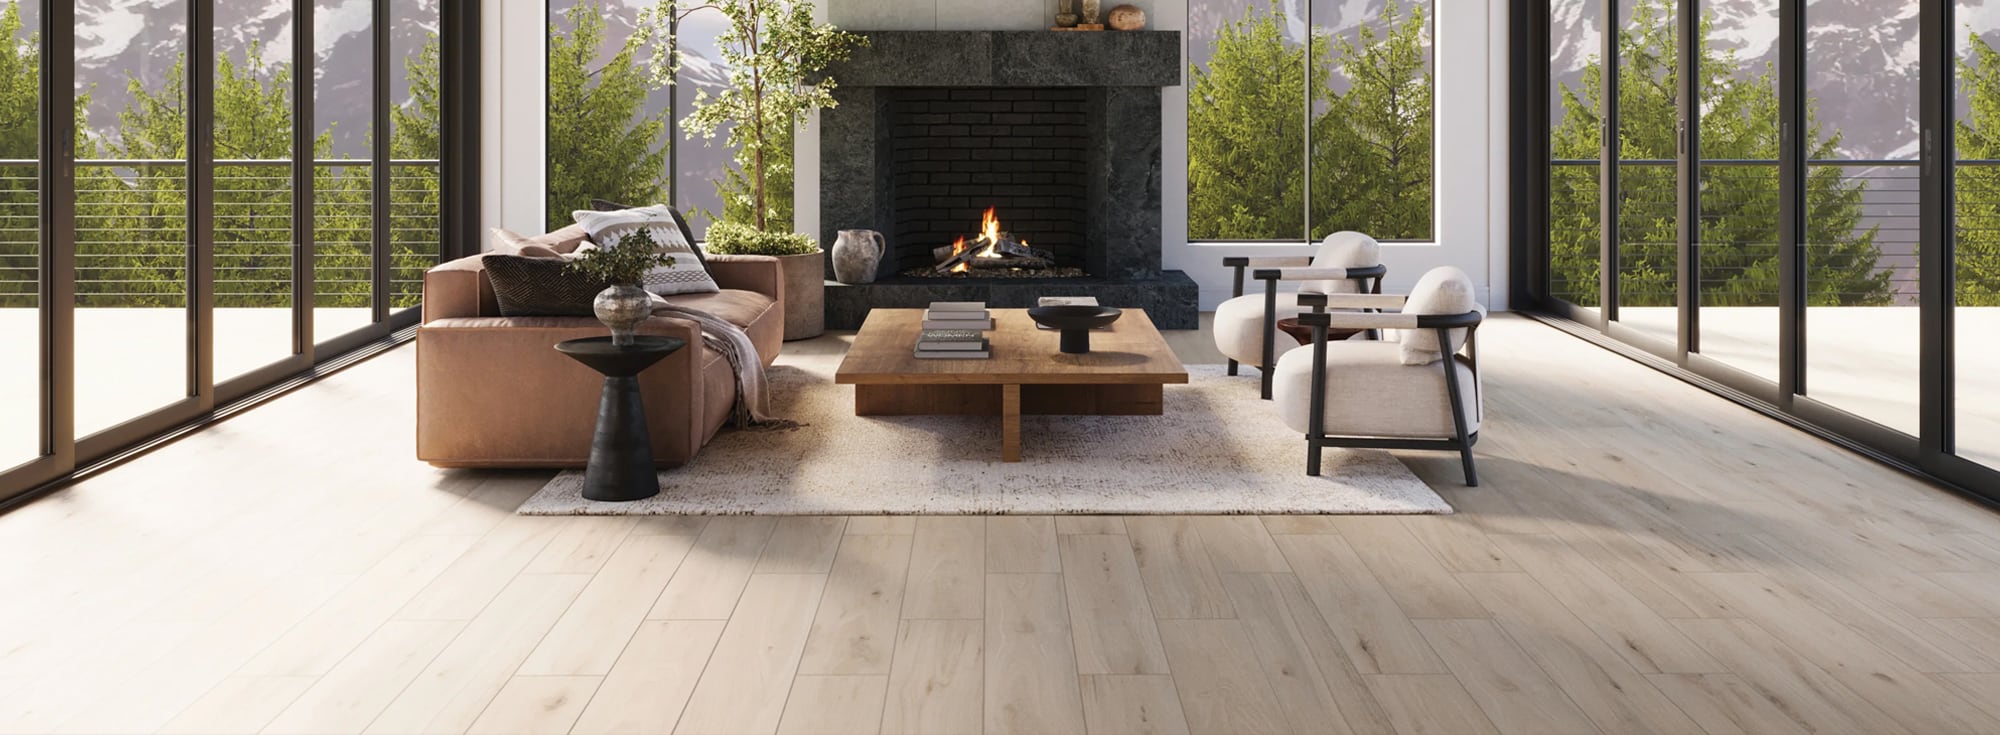 Wood look tile stretches across a serene living room, leading to a cozy fireplace and breathtaking mountain views